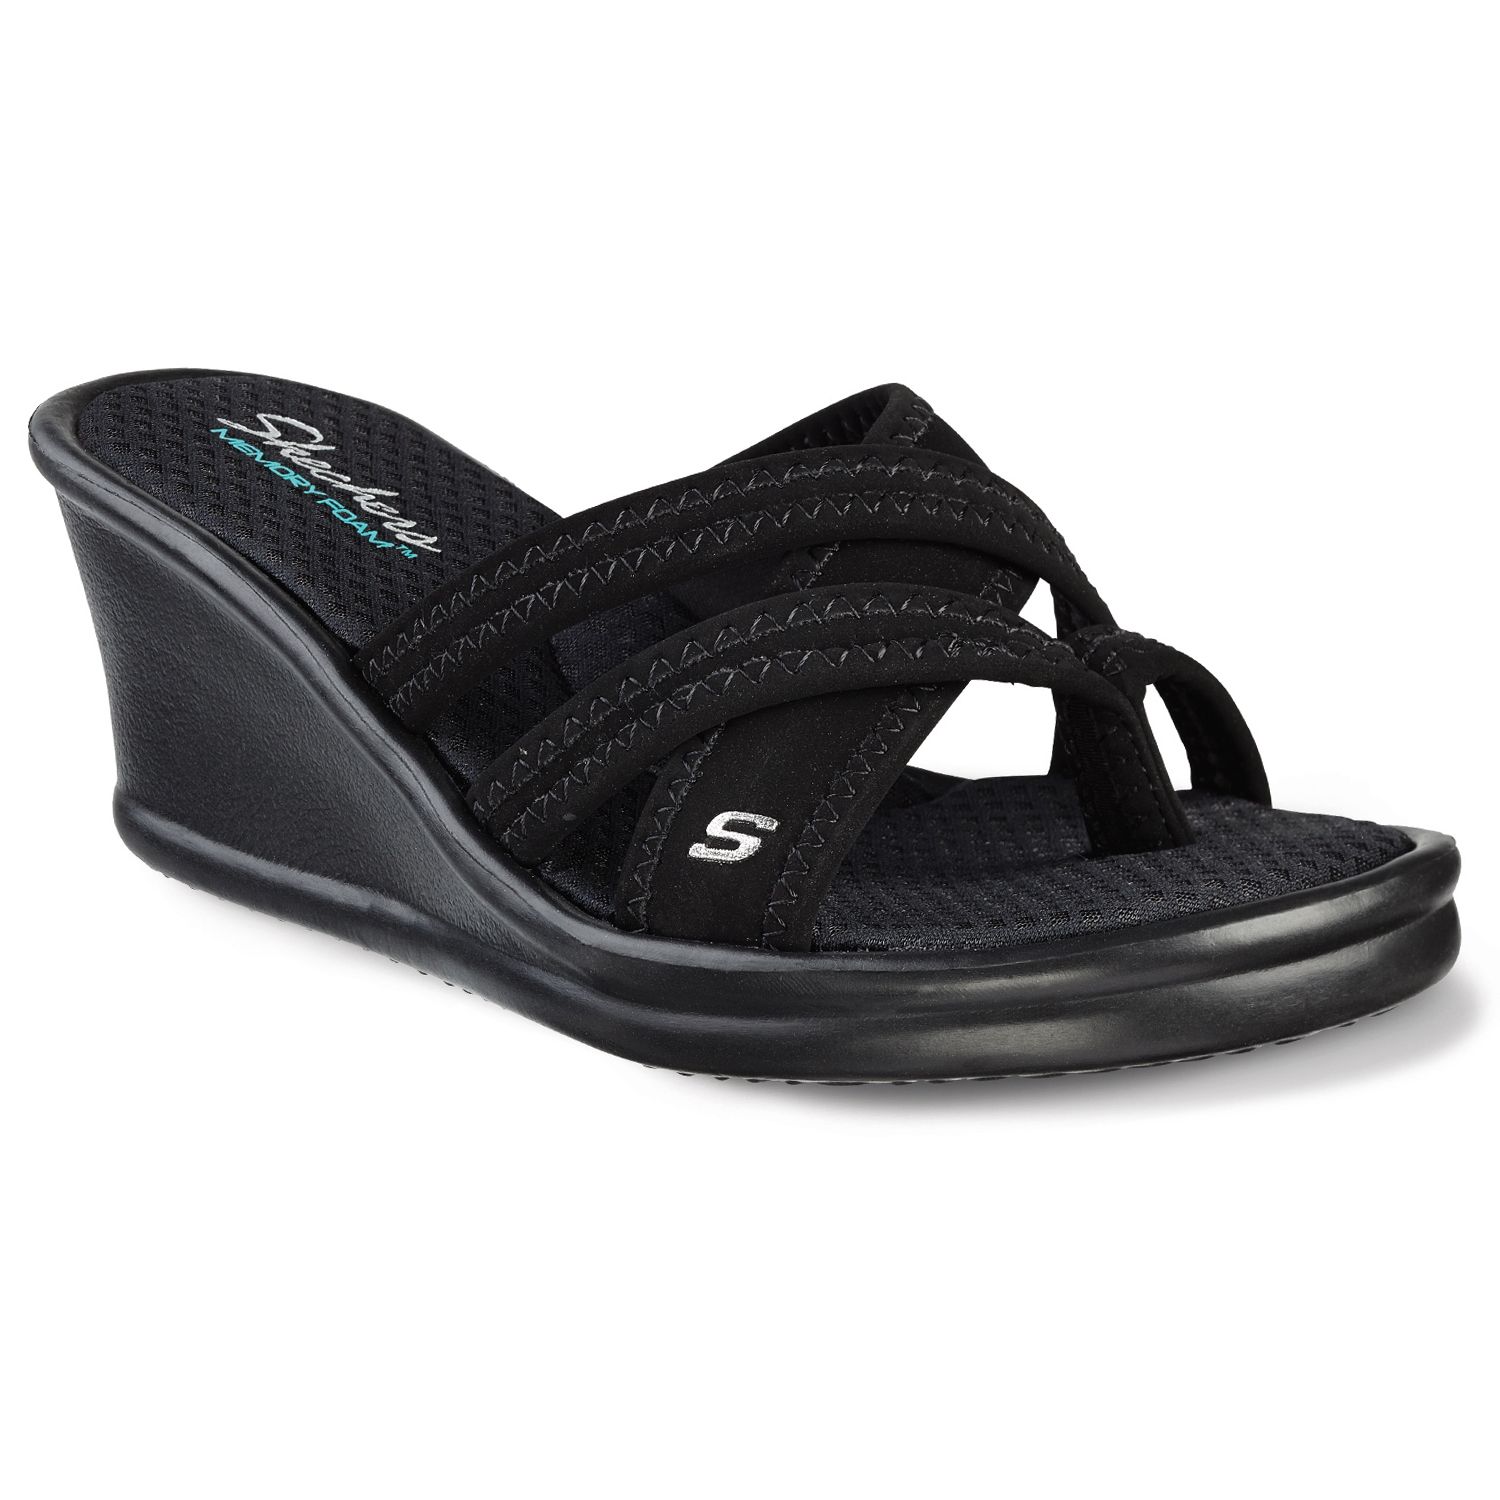 skechers young at heart sandals